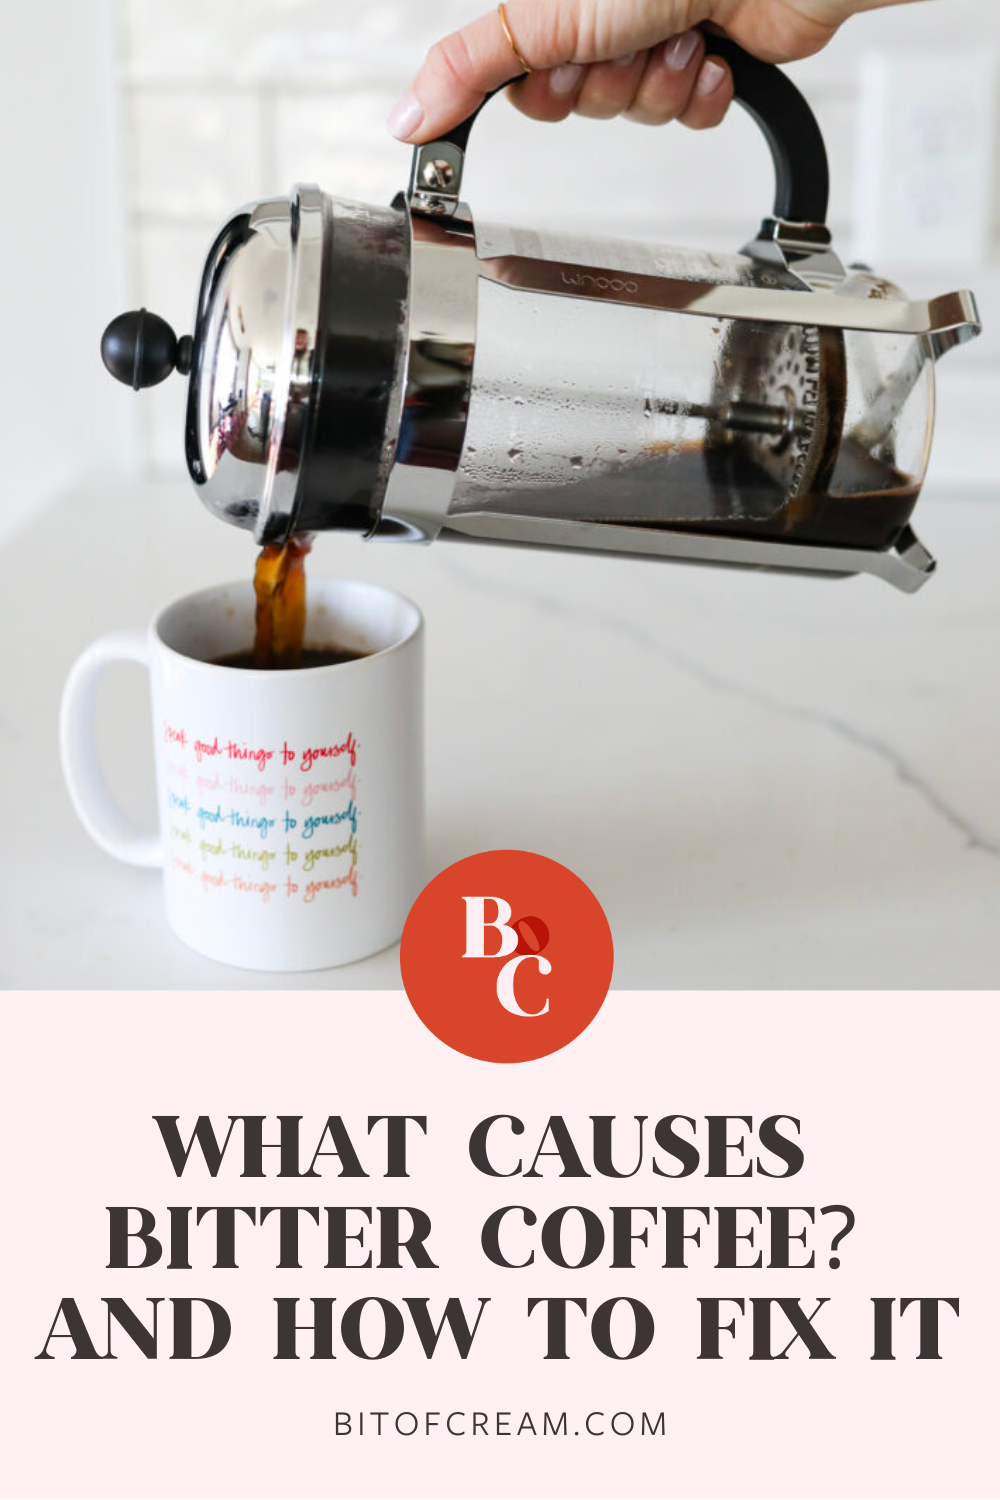 What Causes Bitter Coffee? And How to Fix It